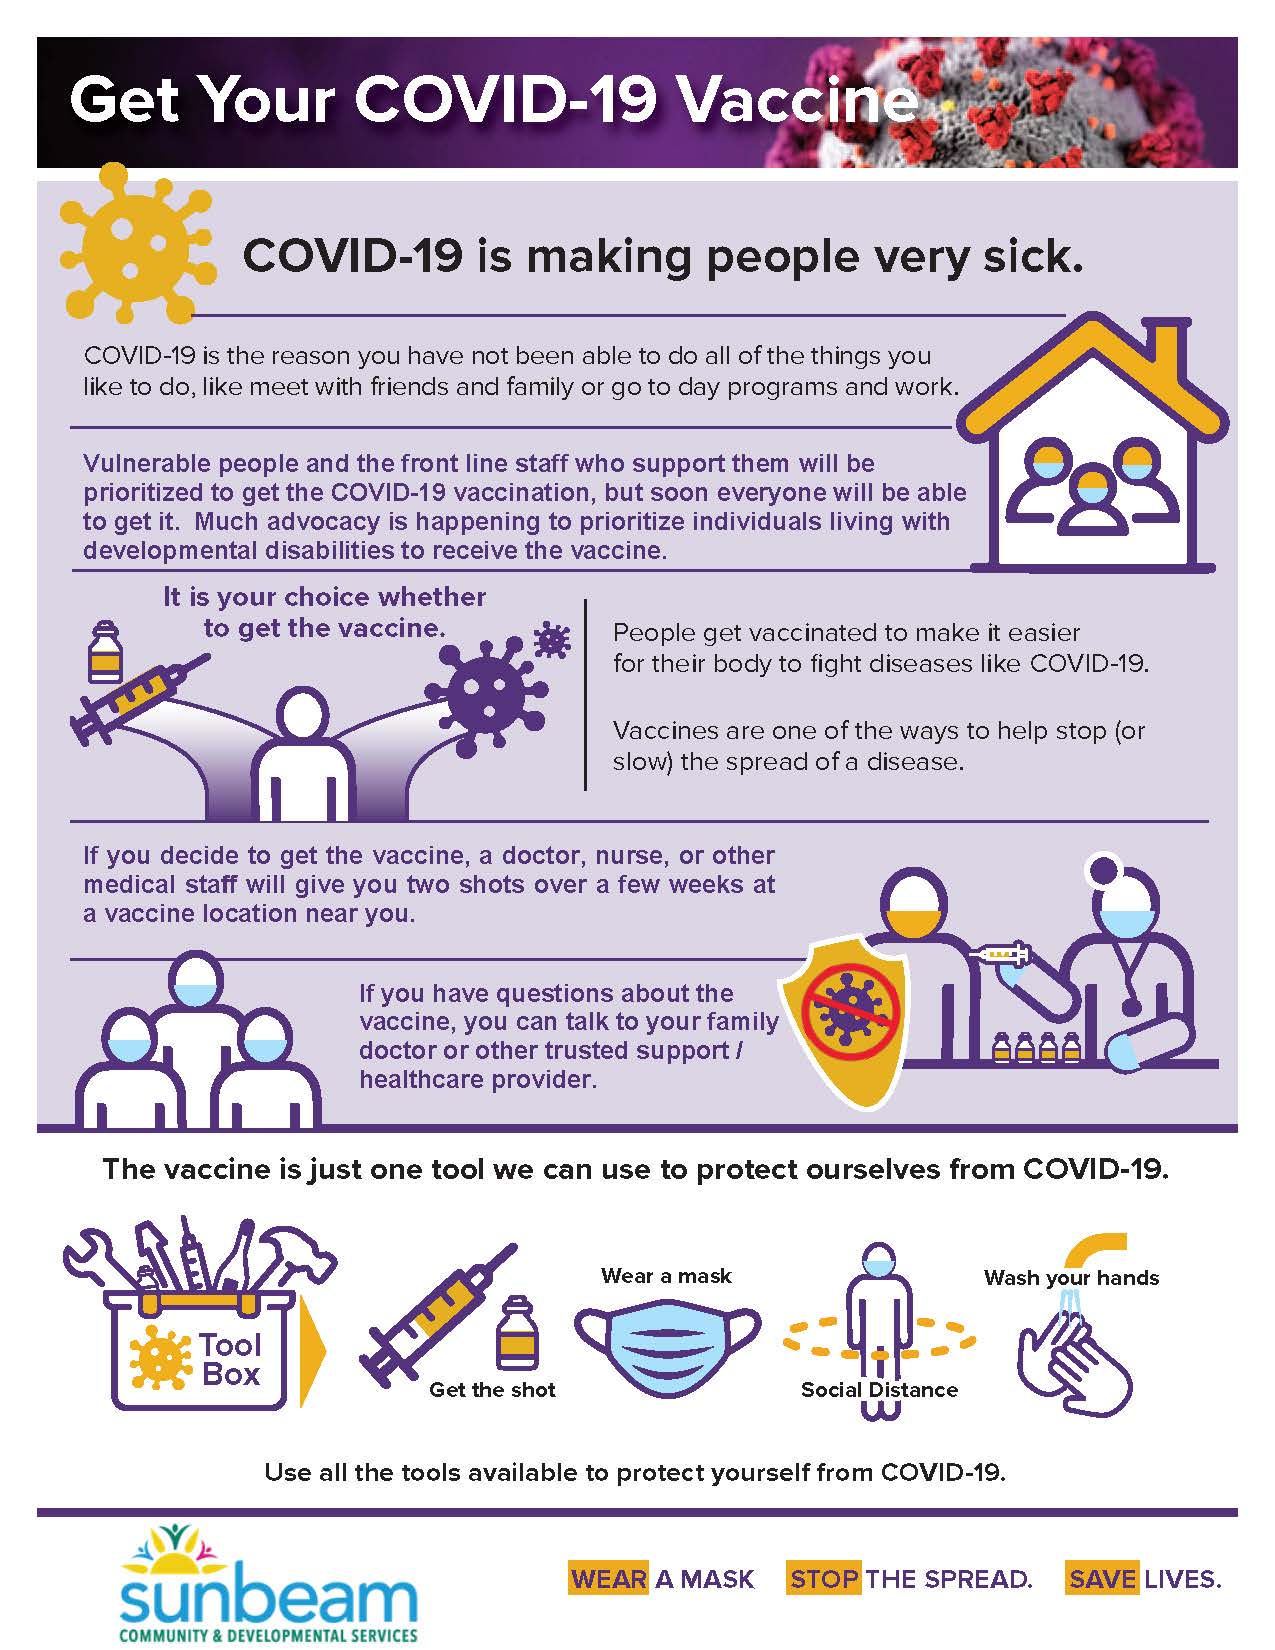 Get your COVID-19 Vaccine